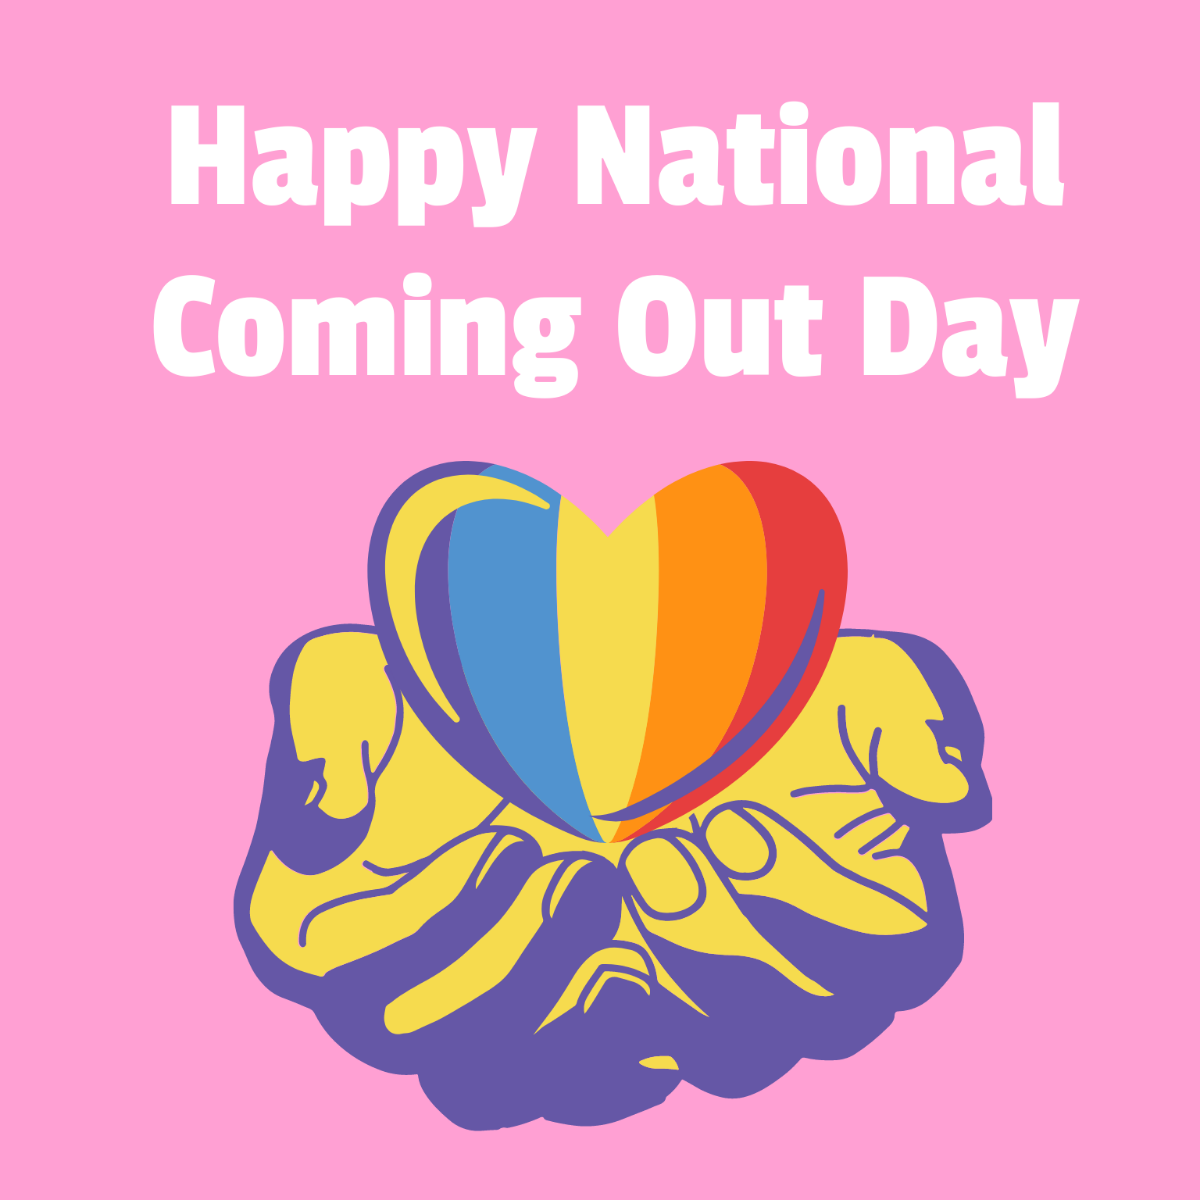 Happy National Coming Out Day Illustration